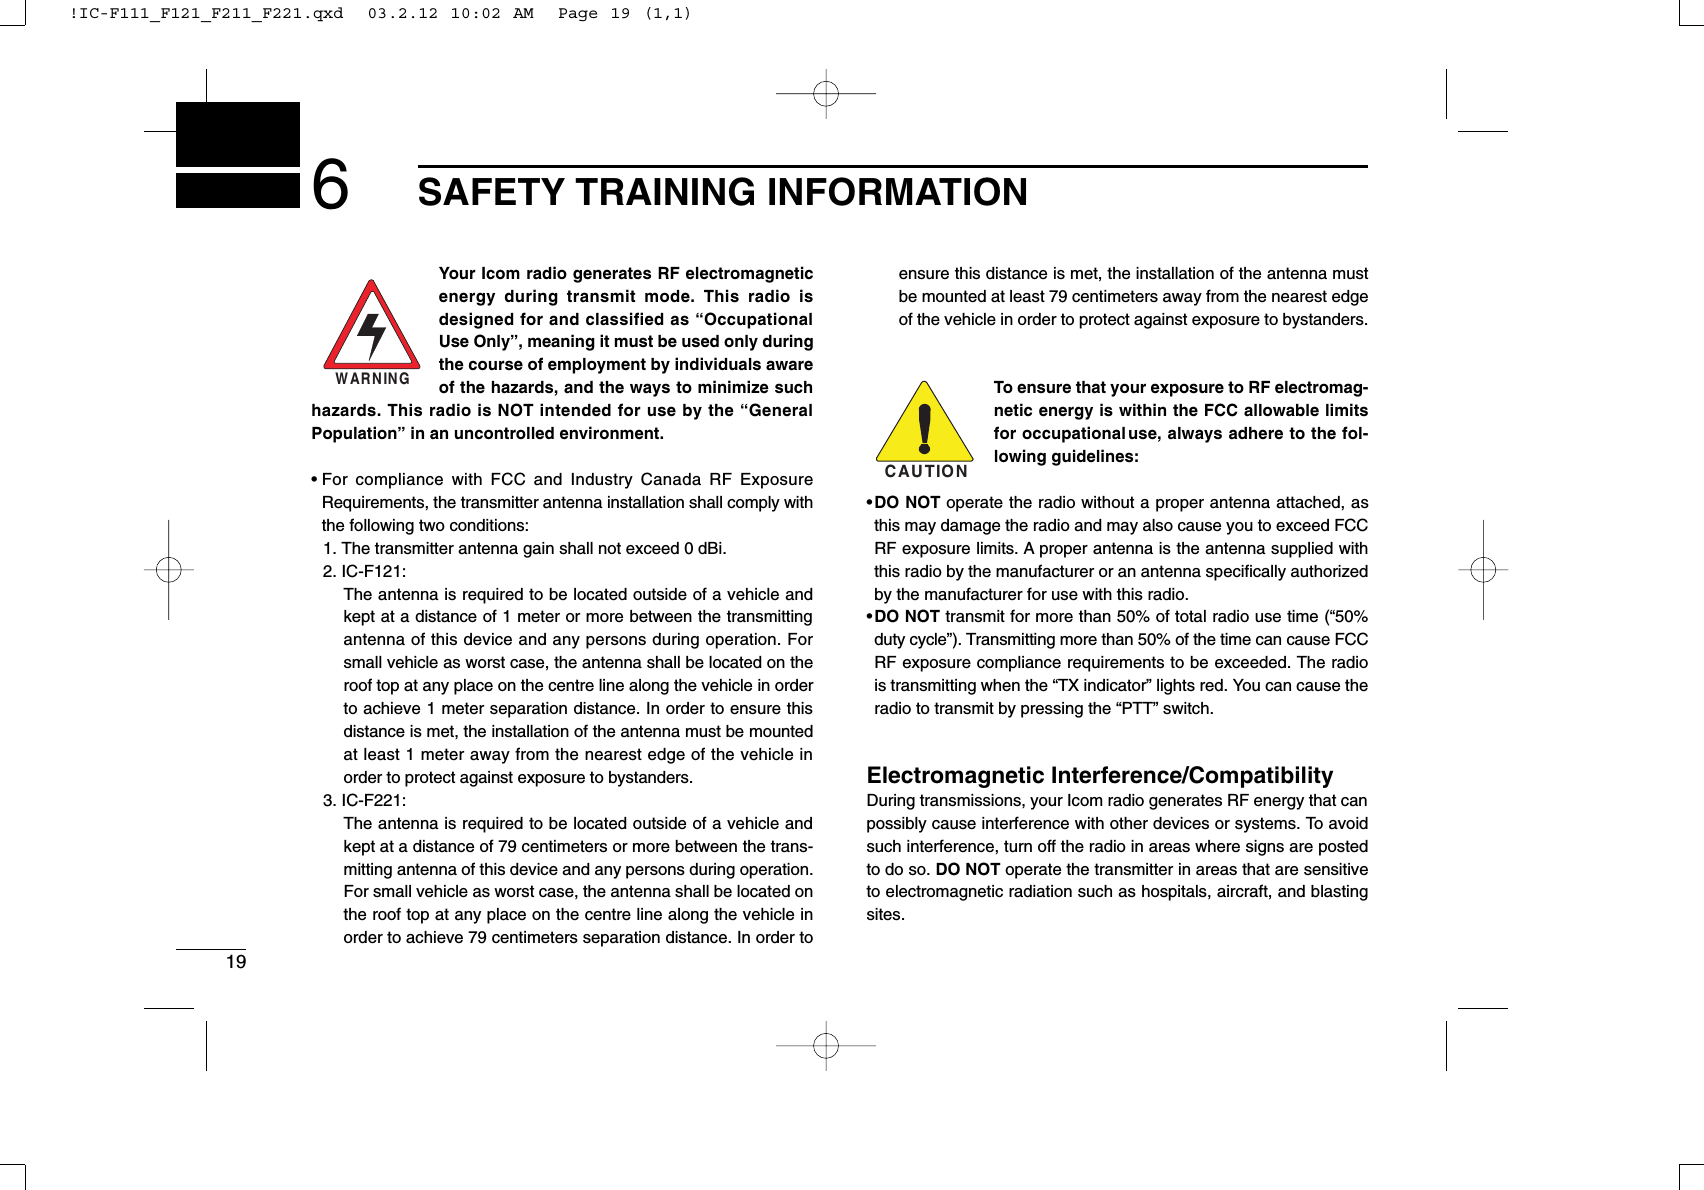 196SAFETY TRAINING INFORMATIONYour Icom radio generates RF electromagneticenergy during transmit mode. This radio isdesigned for and classified as “OccupationalUse Only”, meaning it must be used only duringthe course of employment by individuals awareof the hazards, and the ways to minimize suchhazards. This radio is NOT intended for use by the “GeneralPopulation” in an uncontrolled environment.• For compliance with FCC and Industry Canada RF ExposureRequirements, the transmitter antenna installation shall comply withthe following two conditions:1. The transmitter antenna gain shall not exceed 0 dBi.2. IC-F121:The antenna is required to be located outside of a vehicle andkept at a distance of 1 meter or more between the transmittingantenna of this device and any persons during operation. Forsmall vehicle as worst case, the antenna shall be located on theroof top at any place on the centre line along the vehicle in orderto achieve 1 meter separation distance. In order to ensure thisdistance is met, the installation of the antenna must be mountedat least 1 meter away from the nearest edge of the vehicle inorder to protect against exposure to bystanders.3. IC-F221:The antenna is required to be located outside of a vehicle andkept at a distance of 79 centimeters or more between the trans-mitting antenna of this device and any persons during operation.For small vehicle as worst case, the antenna shall be located onthe roof top at any place on the centre line along the vehicle inorder to achieve 79 centimeters separation distance. In order toensure this distance is met, the installation of the antenna mustbe mounted at least 79 centimeters away from the nearest edgeof the vehicle in order to protect against exposure to bystanders.To ensure that your exposure to RF electromag-netic energy is within the FCC allowable limitsfor occupational use, always adhere to the fol-lowing guidelines:•DO NOT operate the radio without a proper antenna attached, asthis may damage the radio and may also cause you to exceed FCCRF exposure limits. A proper antenna is the antenna supplied withthis radio by the manufacturer or an antenna speciﬁcally authorizedby the manufacturer for use with this radio.•DO NOT transmit for more than 50% of total radio use time (“50%duty cycle”). Transmitting more than 50% of the time can cause FCCRF exposure compliance requirements to be exceeded. The radiois transmitting when the “TX indicator” lights red. You can cause theradio to transmit by pressing the “PTT” switch.Electromagnetic Interference/CompatibilityDuring transmissions, your Icom radio generates RF energy that canpossibly cause interference with other devices or systems. To avoidsuch interference, turn off the radio in areas where signs are postedto do so. DO NOT operate the transmitter in areas that are sensitiveto electromagnetic radiation such as hospitals, aircraft, and blastingsites.WARNINGCAUTION!IC-F111_F121_F211_F221.qxd  03.2.12 10:02 AM  Page 19 (1,1)